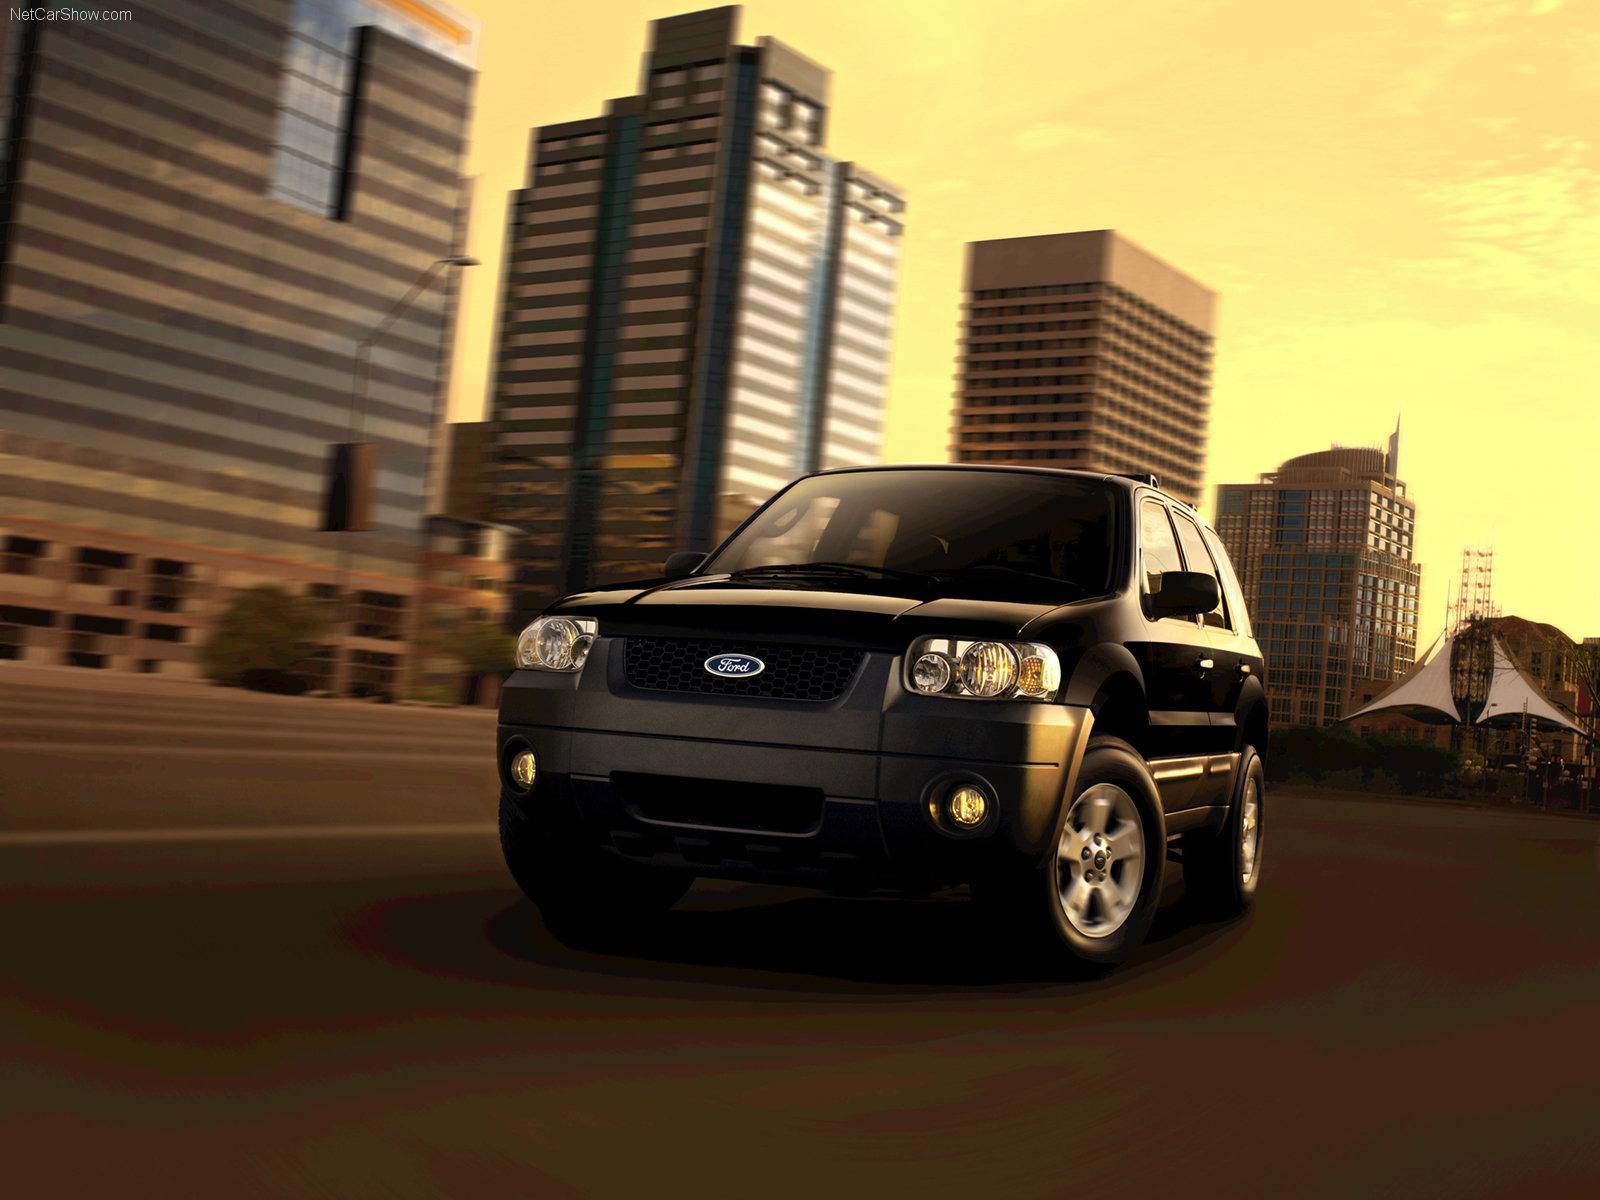 Ford Escape picture. Ford photo gallery